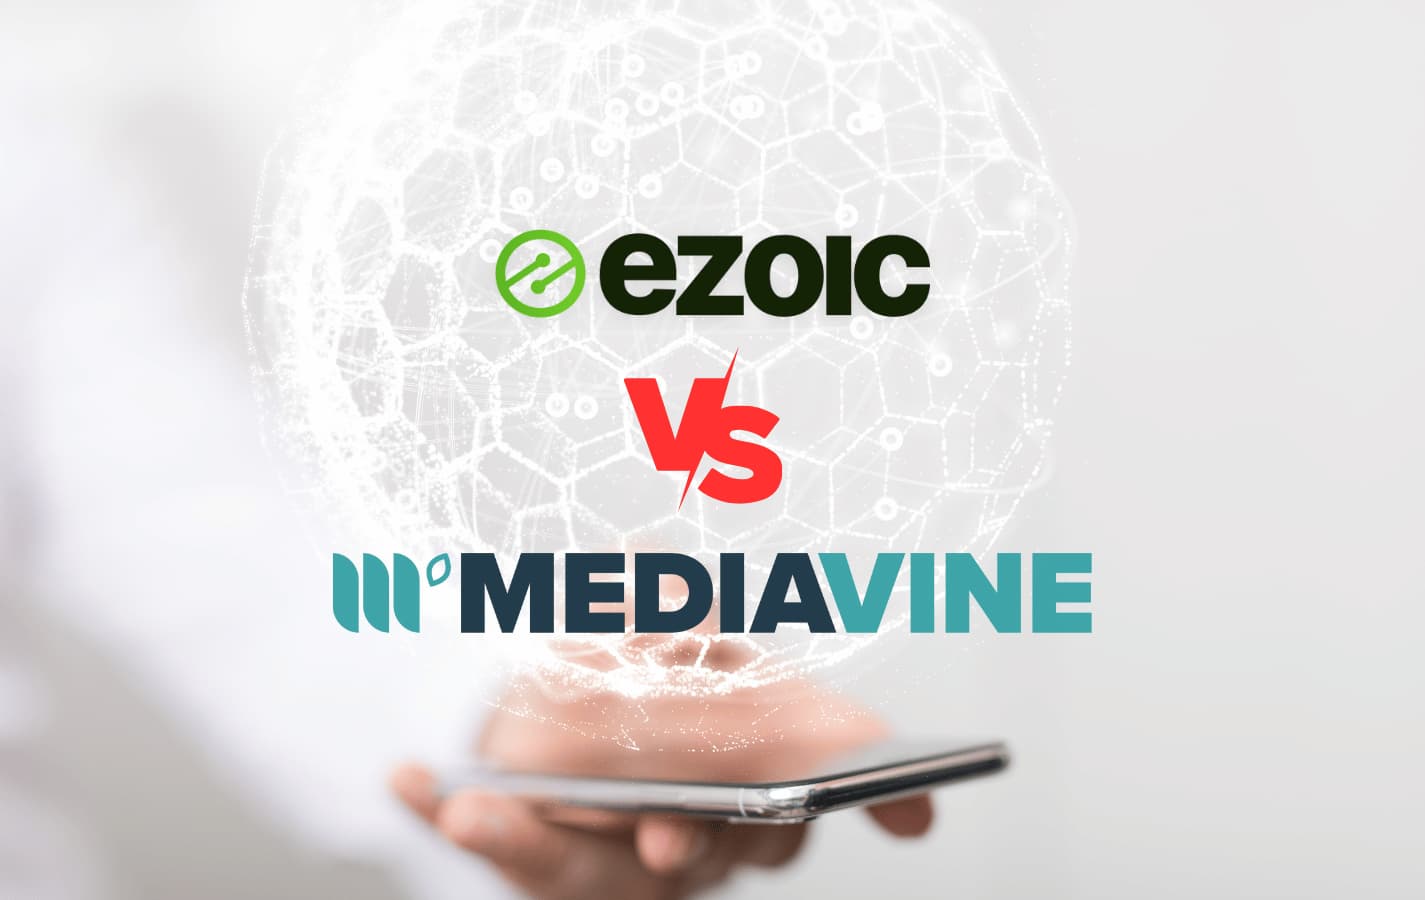 Phone showing a 3d world above it - discussion focused on the Ezoic and Mediavine logos displayed